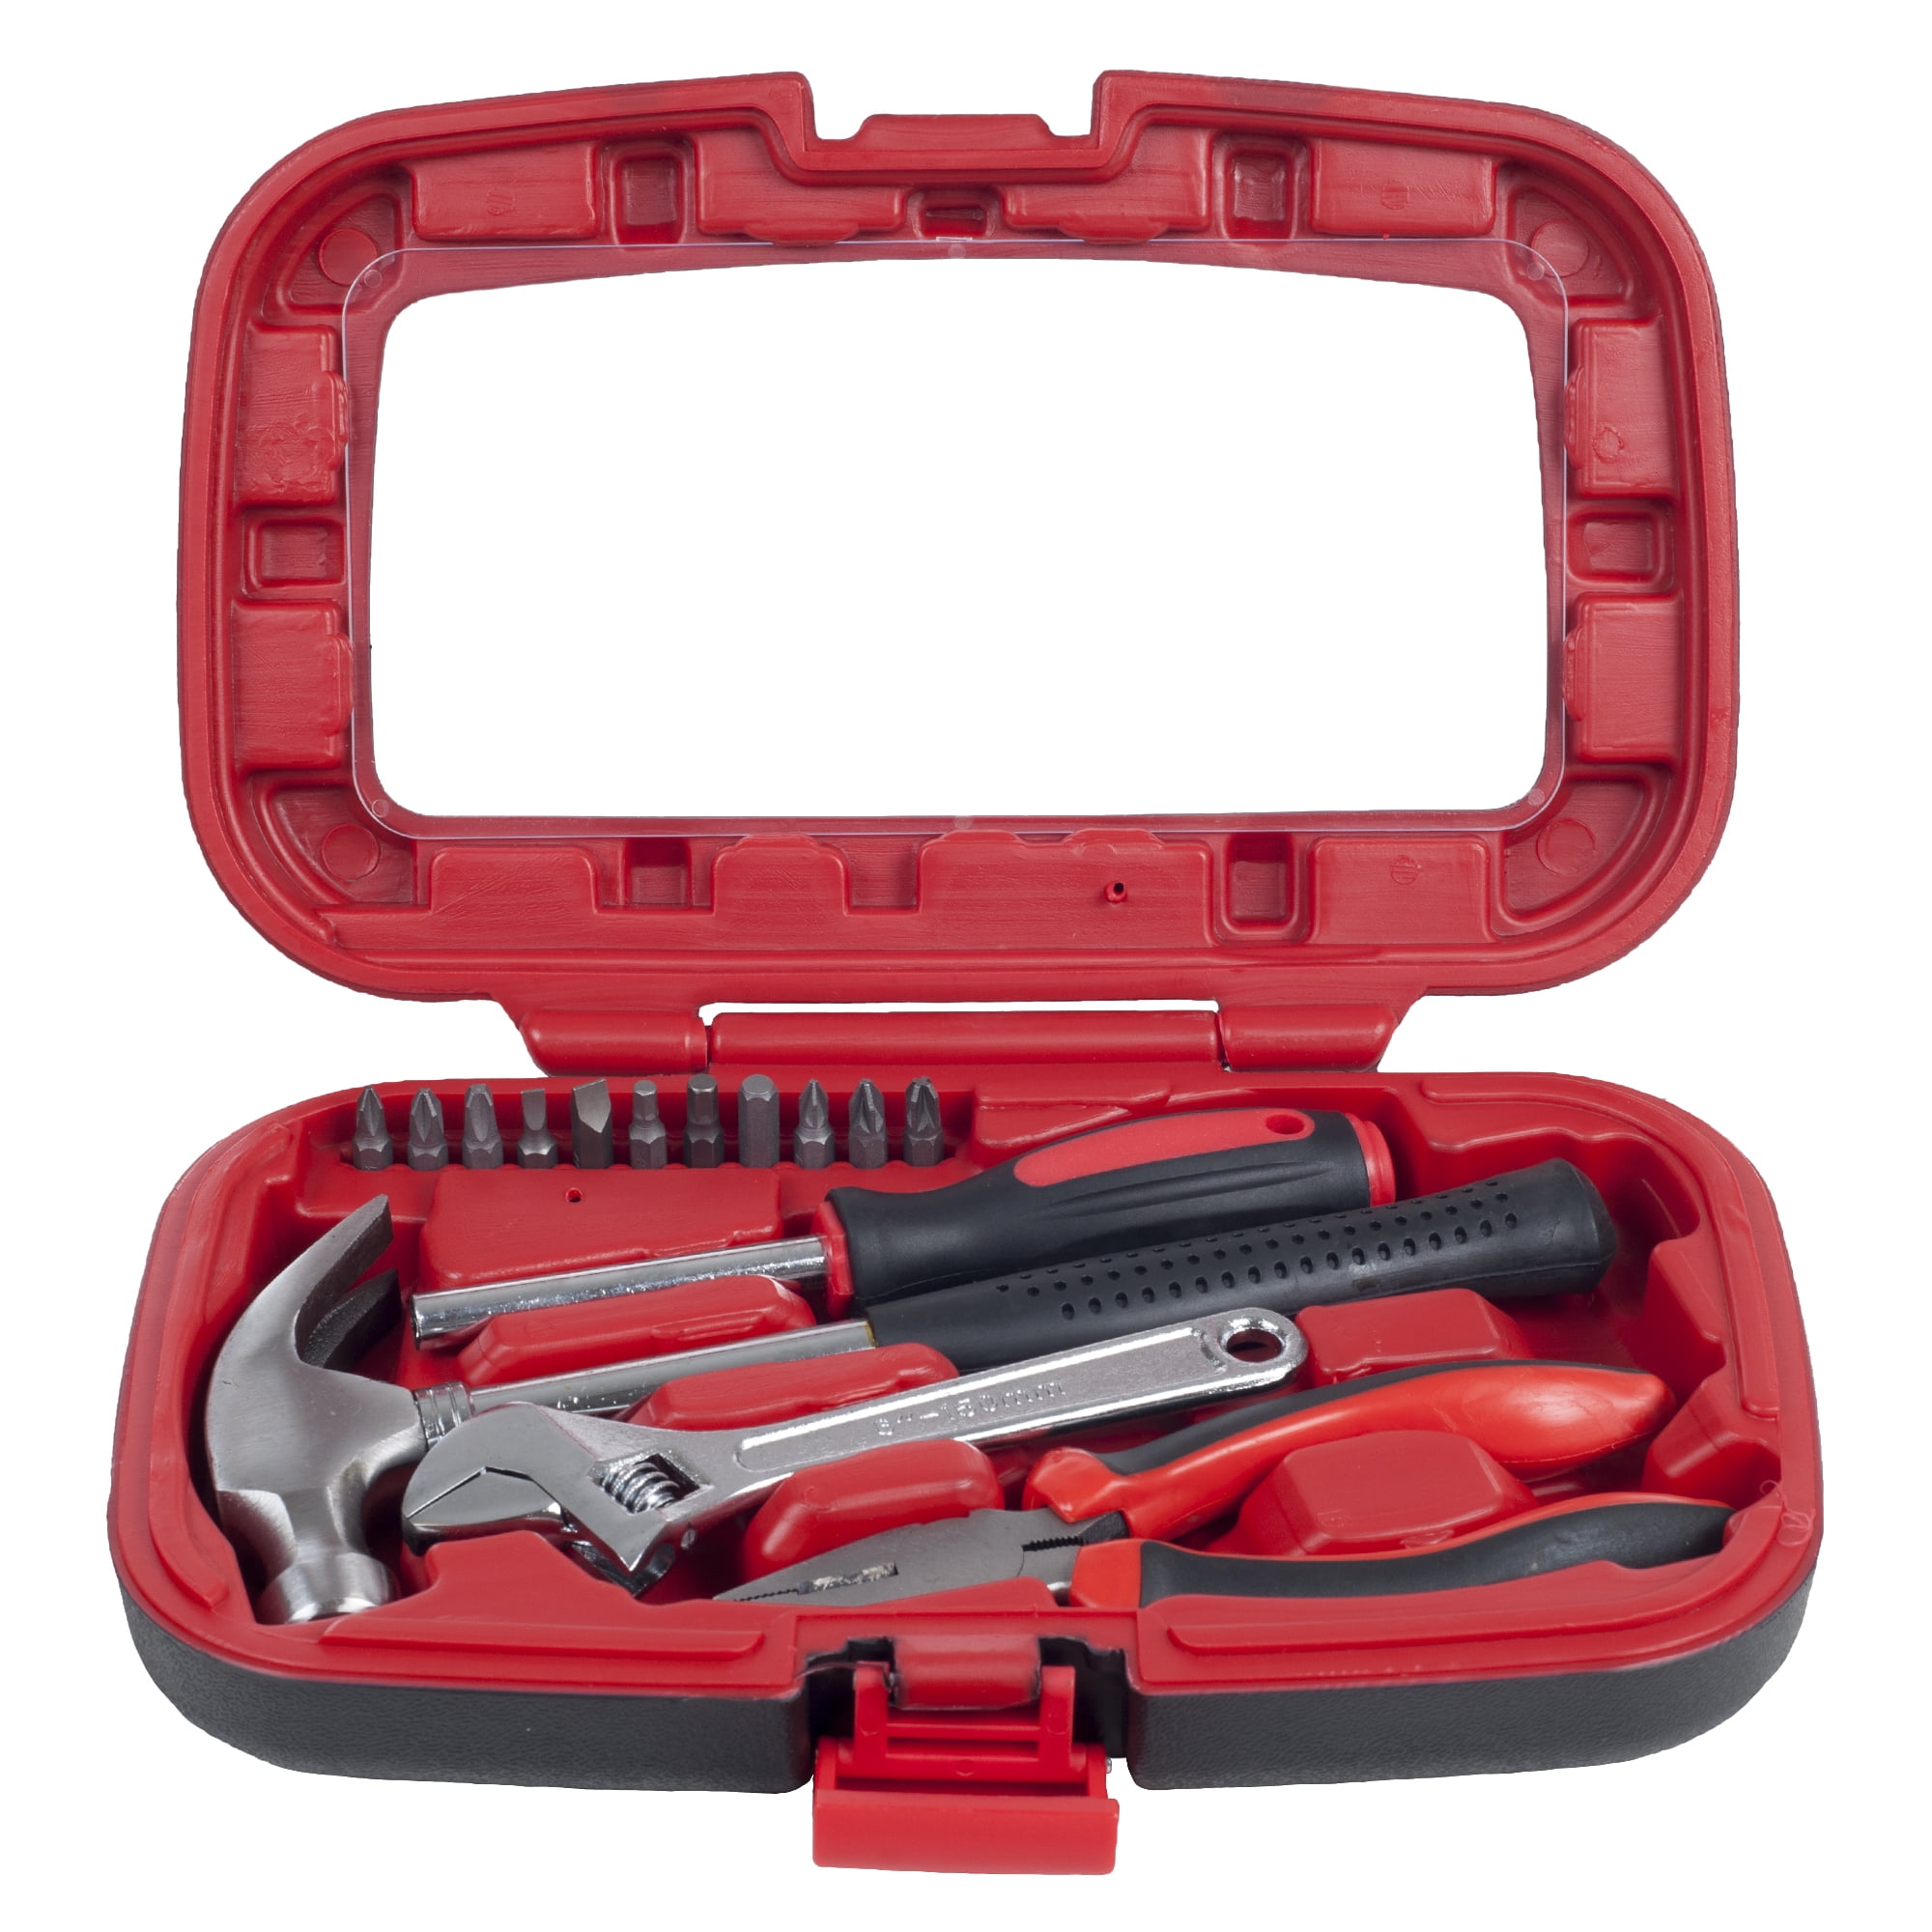 Stalwart Household Hand Tools, Tool Set - 6 Piece Tool Kit for the 